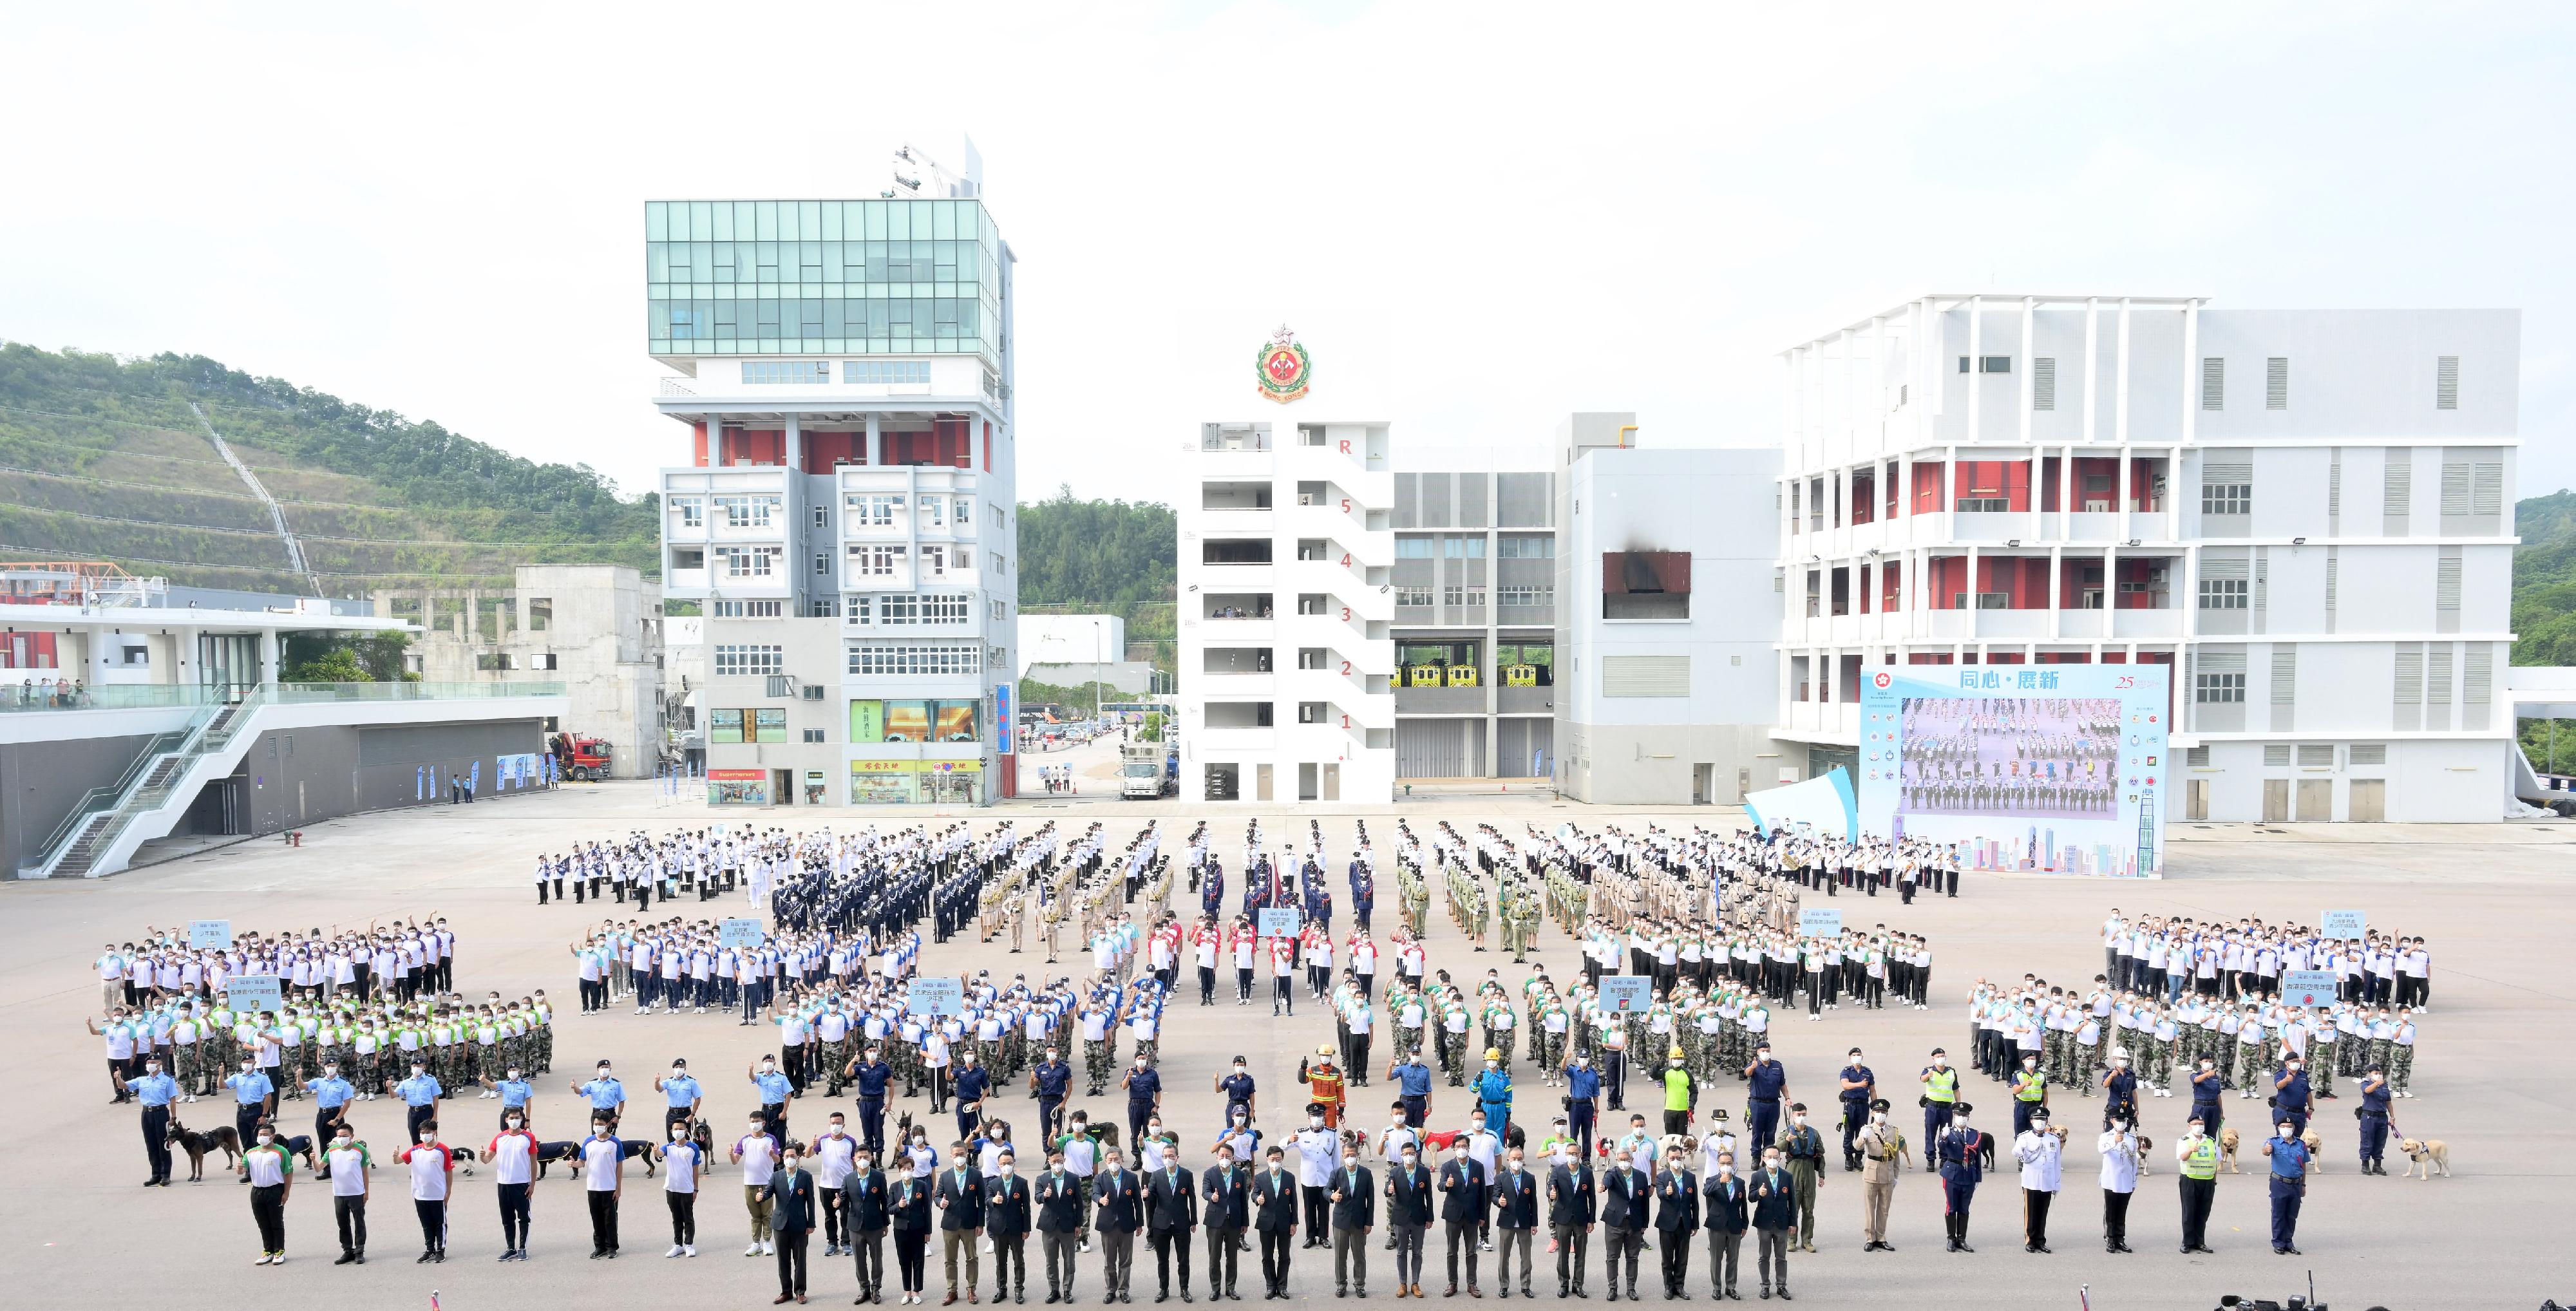 The Chief Executive, Mr John Lee, attended the "Together We Prosper" Grand Parade by Disciplined Services and Youth Groups for Celebrating the 73rd Anniversary of the Founding of the People's Republic of China and the 25th Anniversary of the Establishment of the Hong Kong Special Administrative Regiontoday (September 24). Photo shows (front row, from left) the Commissioner of the Civil Aid Service, Mr Lo Yan-lai;the Director of Fire Services, Mr Andy Yeung; the Commissioner of Customs and Excise, Ms Louise Ho;the Commissioner of Police, Mr Siu Chak-yee; the Permanent Secretary for Security, Mr Patrick Li; the Deputy Secretary for Justice, Mr Cheung Kwok-kwan; the Deputy Chief Secretary for Administration, Mr Cheuk Wing-hing; the Secretary for Justice, Mr Paul Lam, SC; the Chief Secretary for Administration, Mr Chan Kwok-ki; Mr Lee; the Financial Secretary, Mr Paul Chan; the Secretary for Security, Mr Tang Ping-keung; the Deputy Financial Secretary, Mr Michael Wong; the Secretary for Constitutional and Mainland Affairs, Mr Erick Tsang Kwok-wai; the Under Secretary for Security, Mr Michael Cheuk Hau-yip; the Director of Immigration, Mr Au Ka-wang; the Commissioner of Correctional Services, Mr Wong Kwok-hing; the Controller of the Government Flying Service, Captain Wu Wai-hung; the Commissioner of the Auxiliary Medical Service, Dr Ronald Lam, and performers at the event.